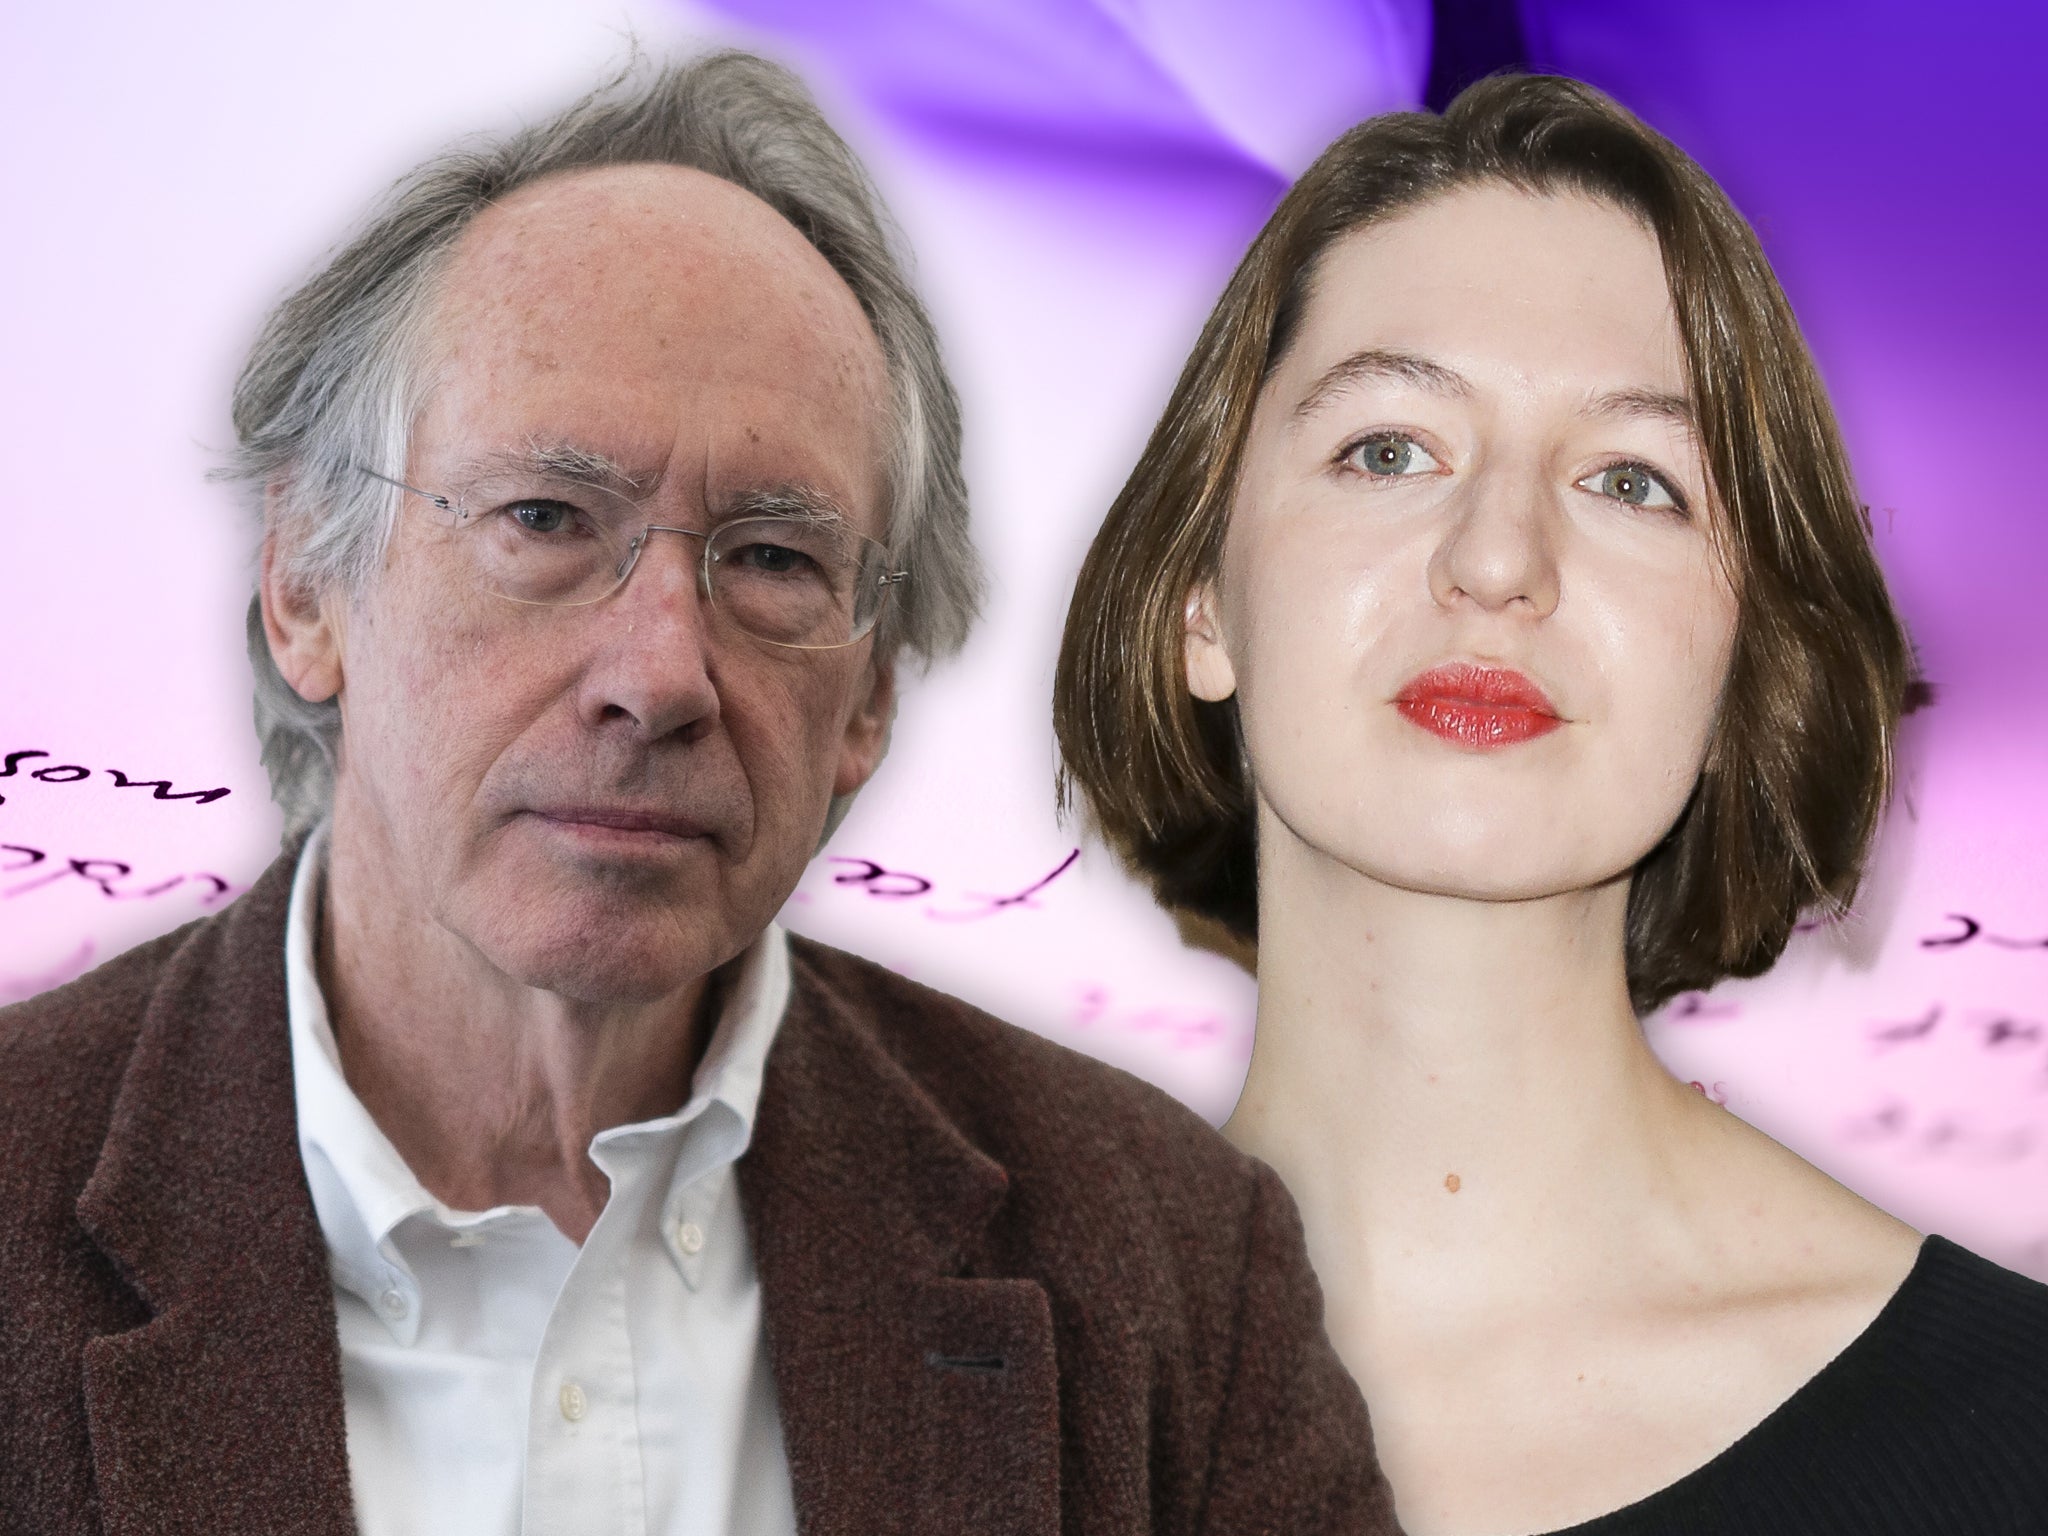 Ian McEwan, left, part of the ‘old guard’ of male literary icons, and Sally Rooney, right, part of the new, women-driven paradigm